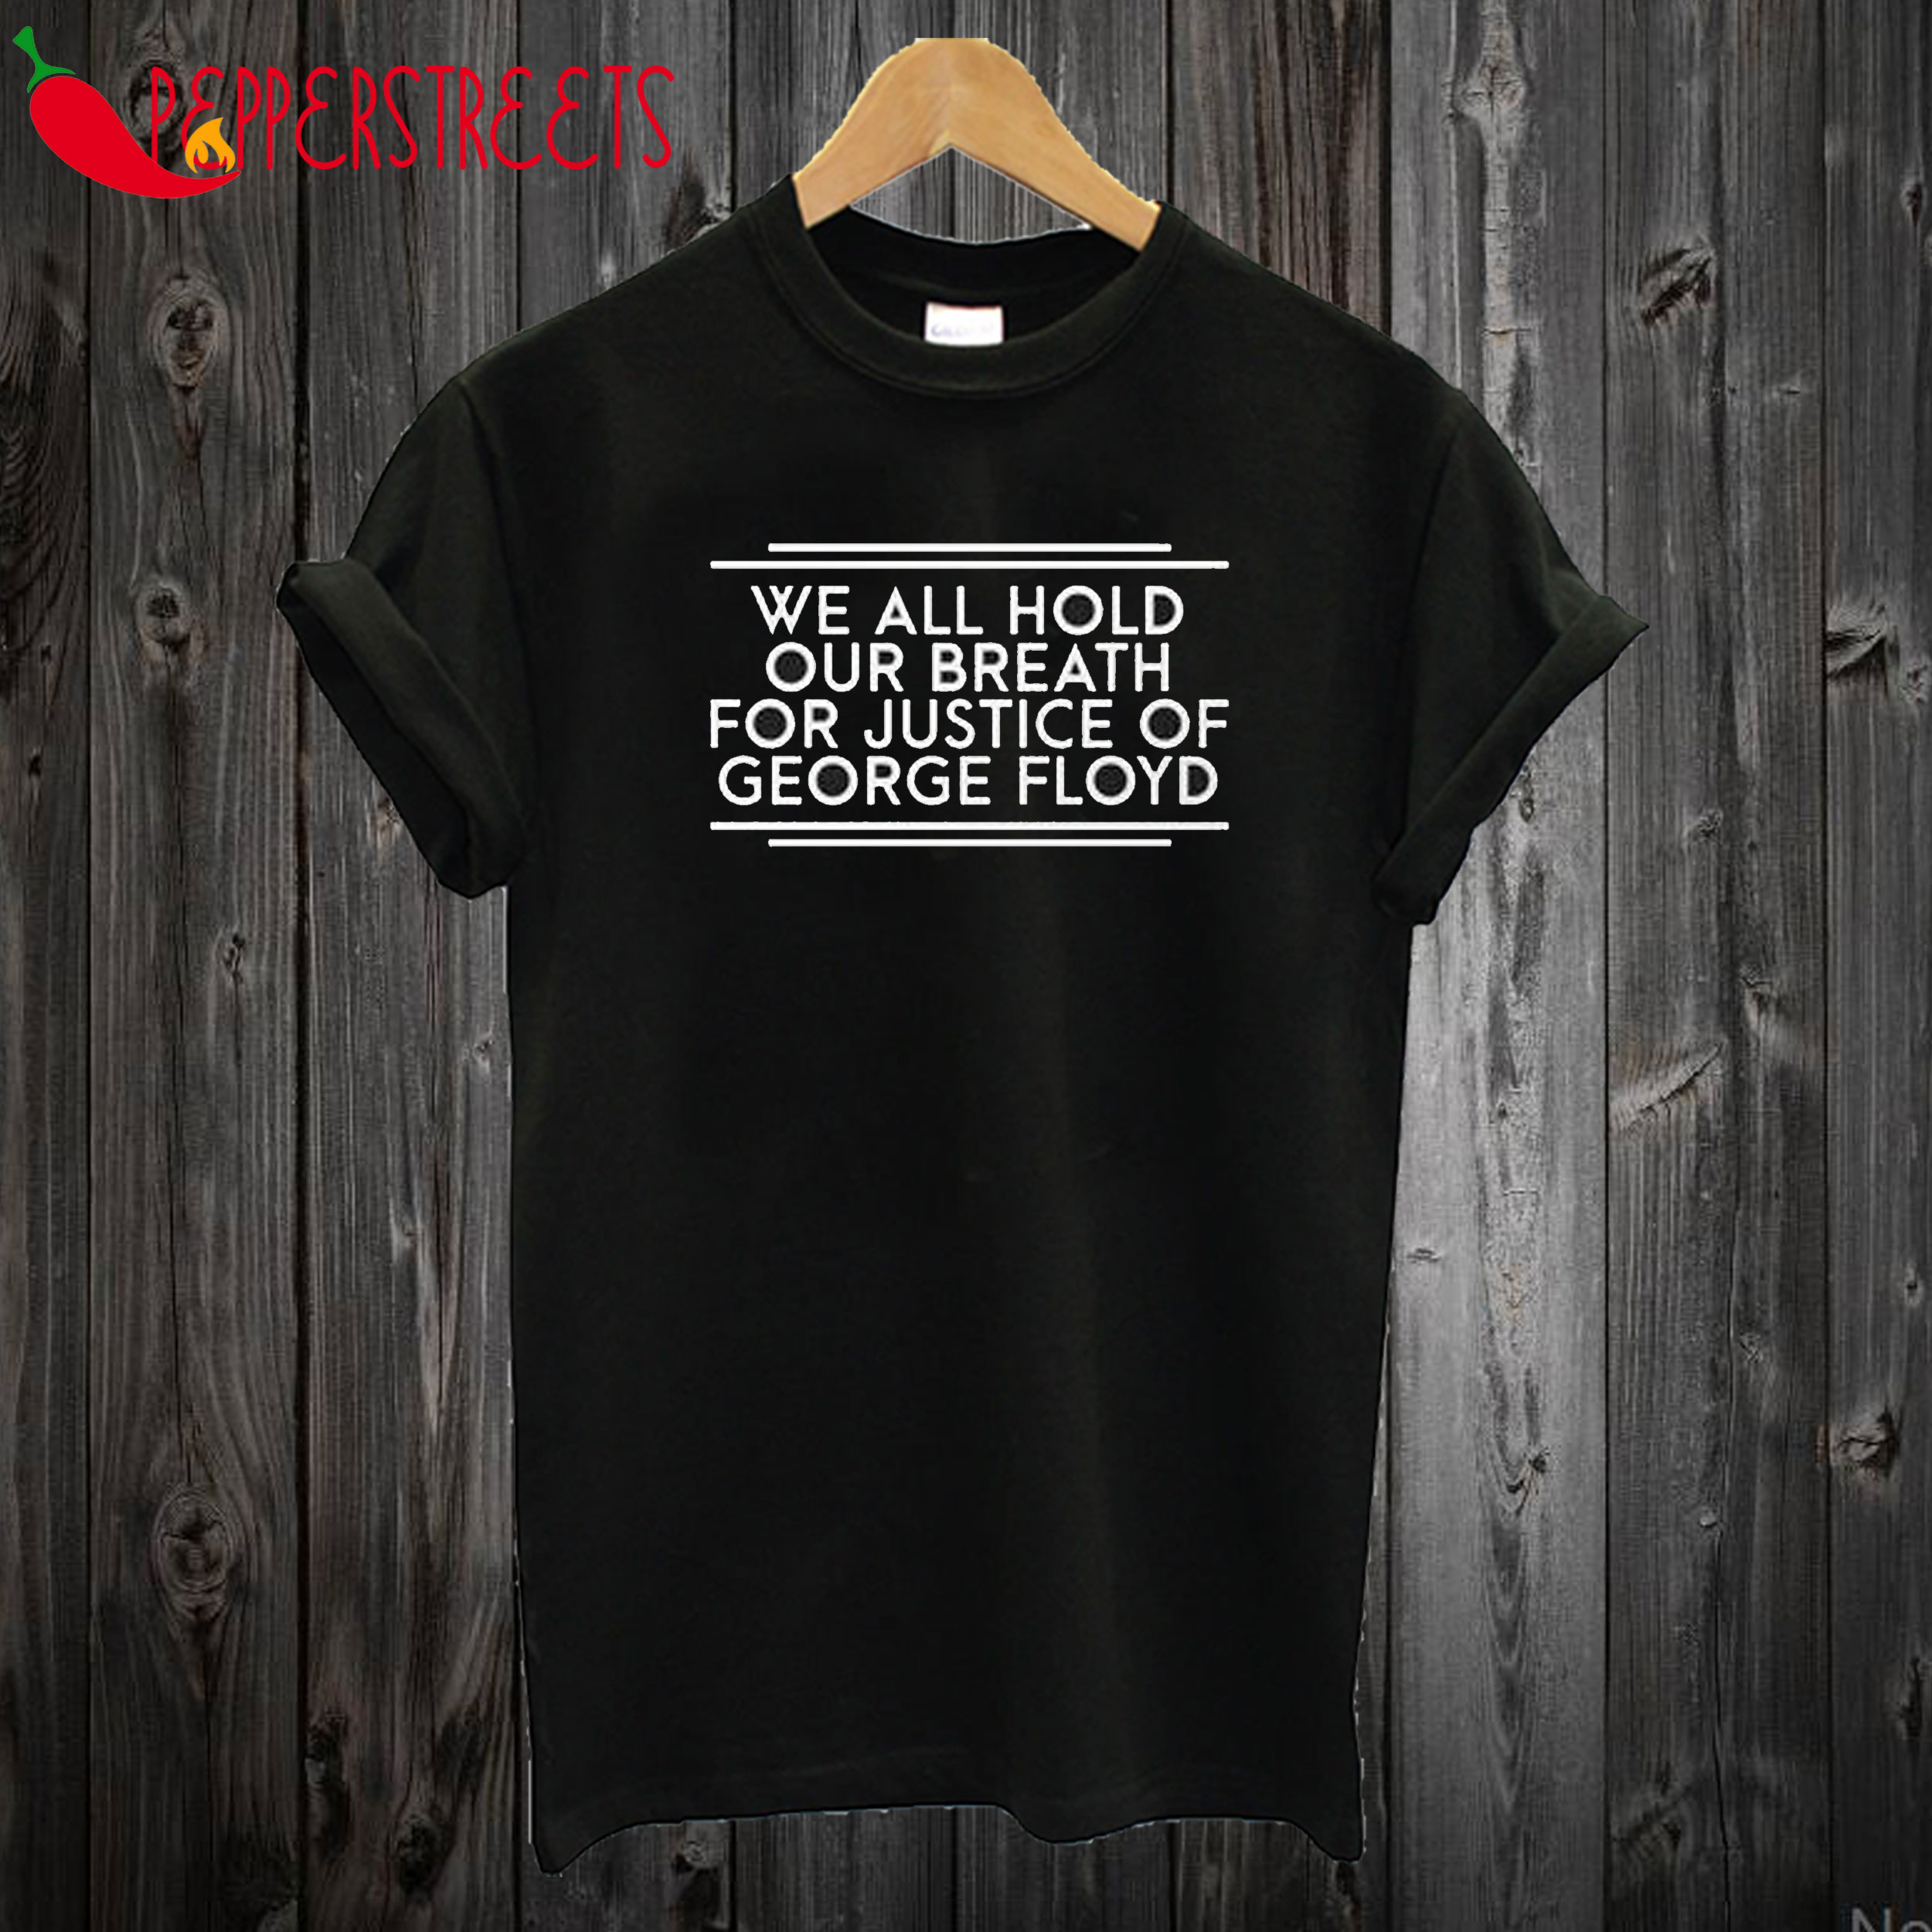 We all hold our breath for justice of George Floyd T Shirt